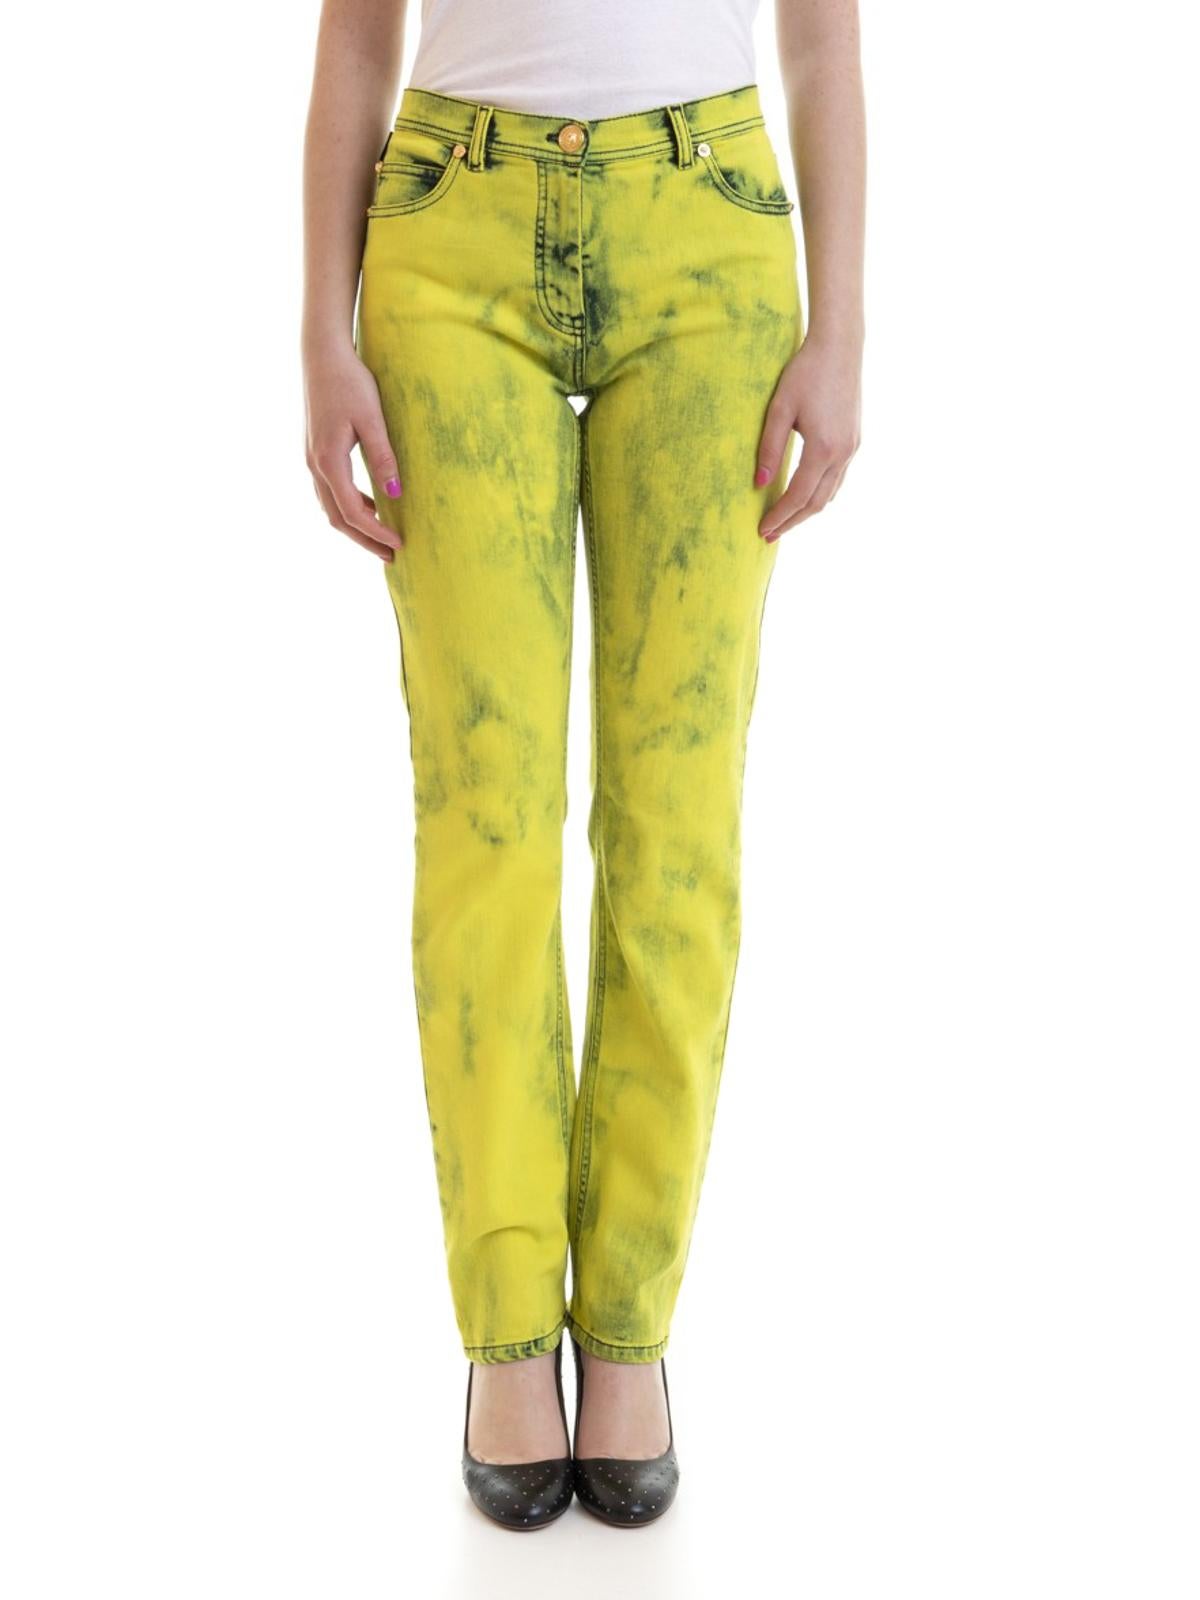 Women's Versace Yellow Acid Wash Denim Skinny Jeans with Logo Label Size 27 For Sale